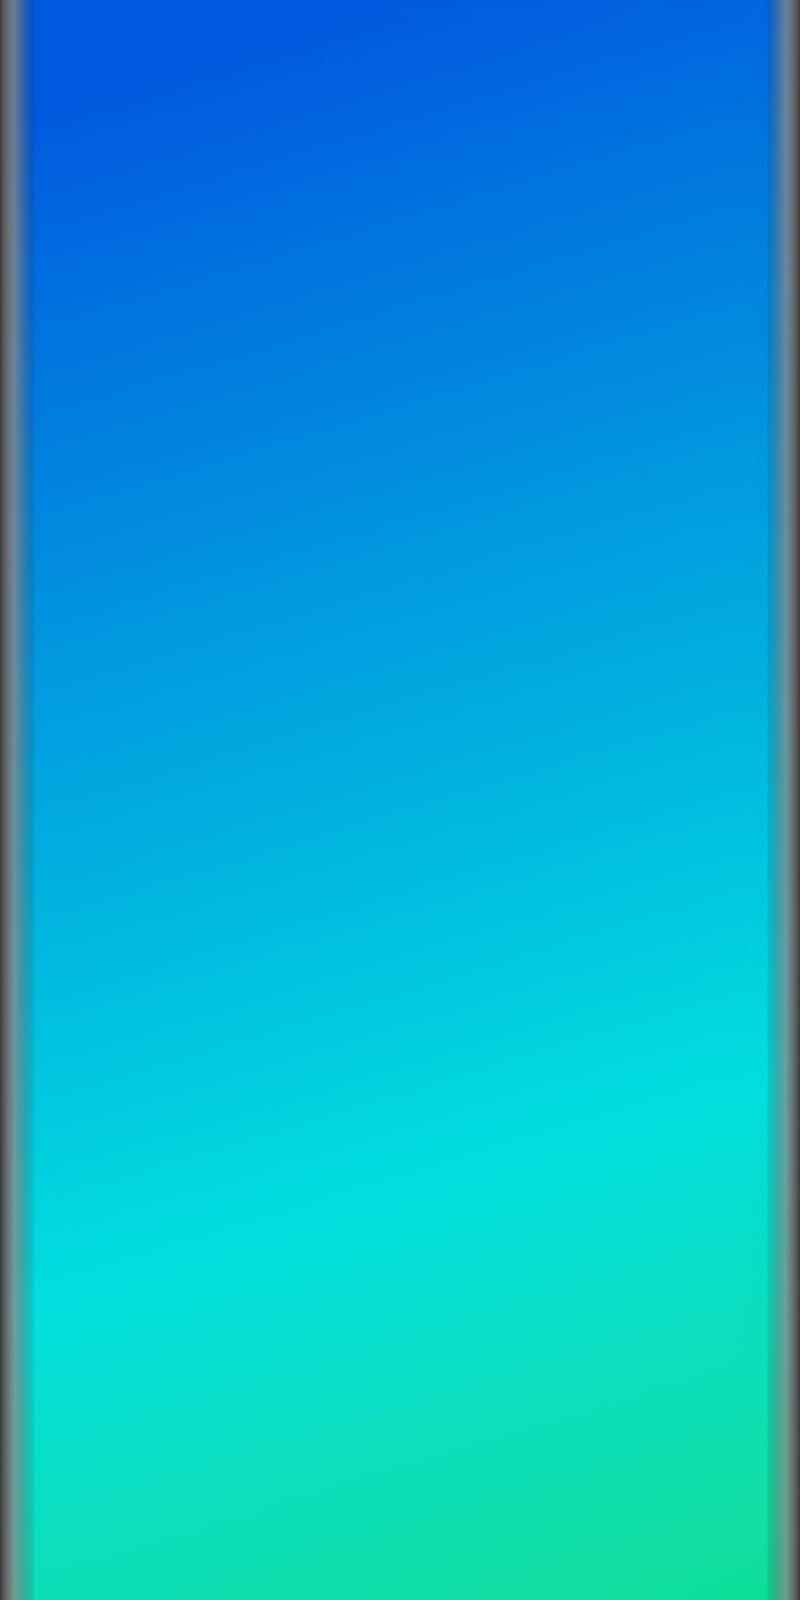 EDGE - BLUE - COLORS, abstract style, android edge, bubu, coolest ...